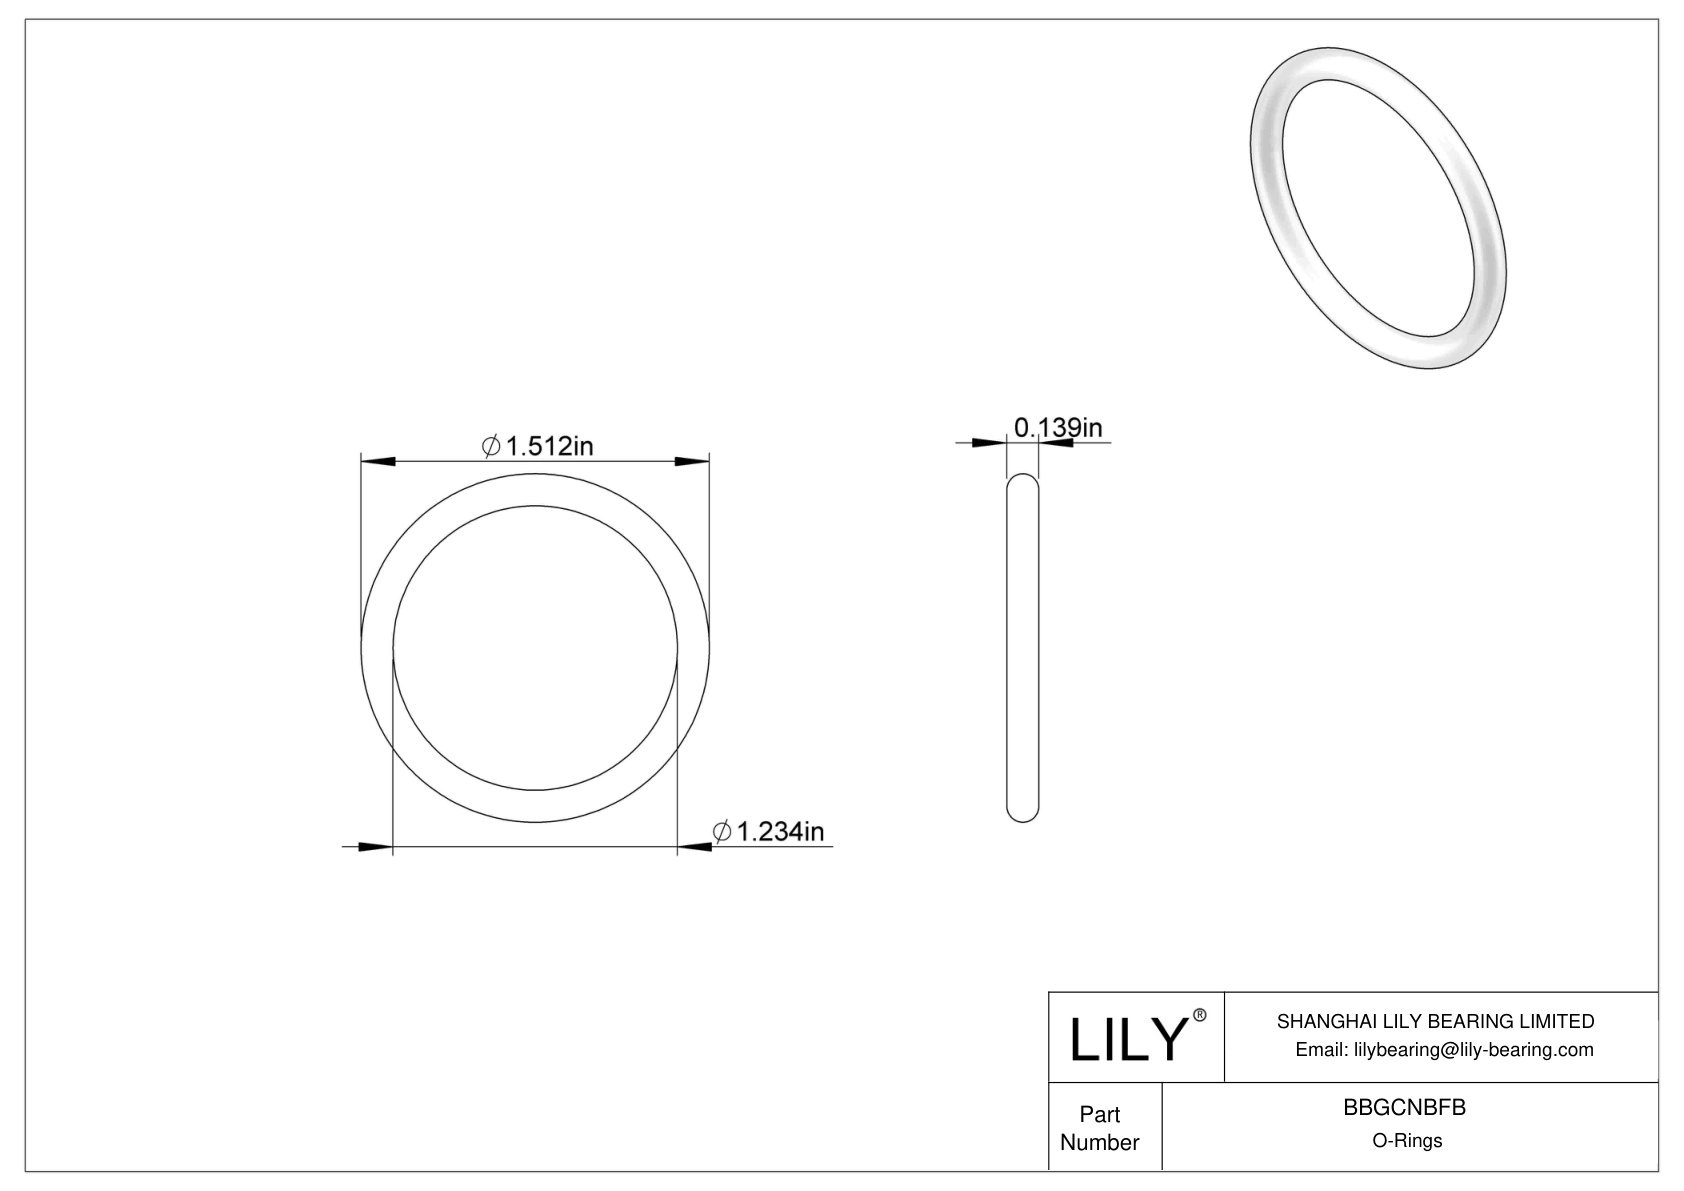 BBGCNBFB High Temperature O-Rings Round cad drawing